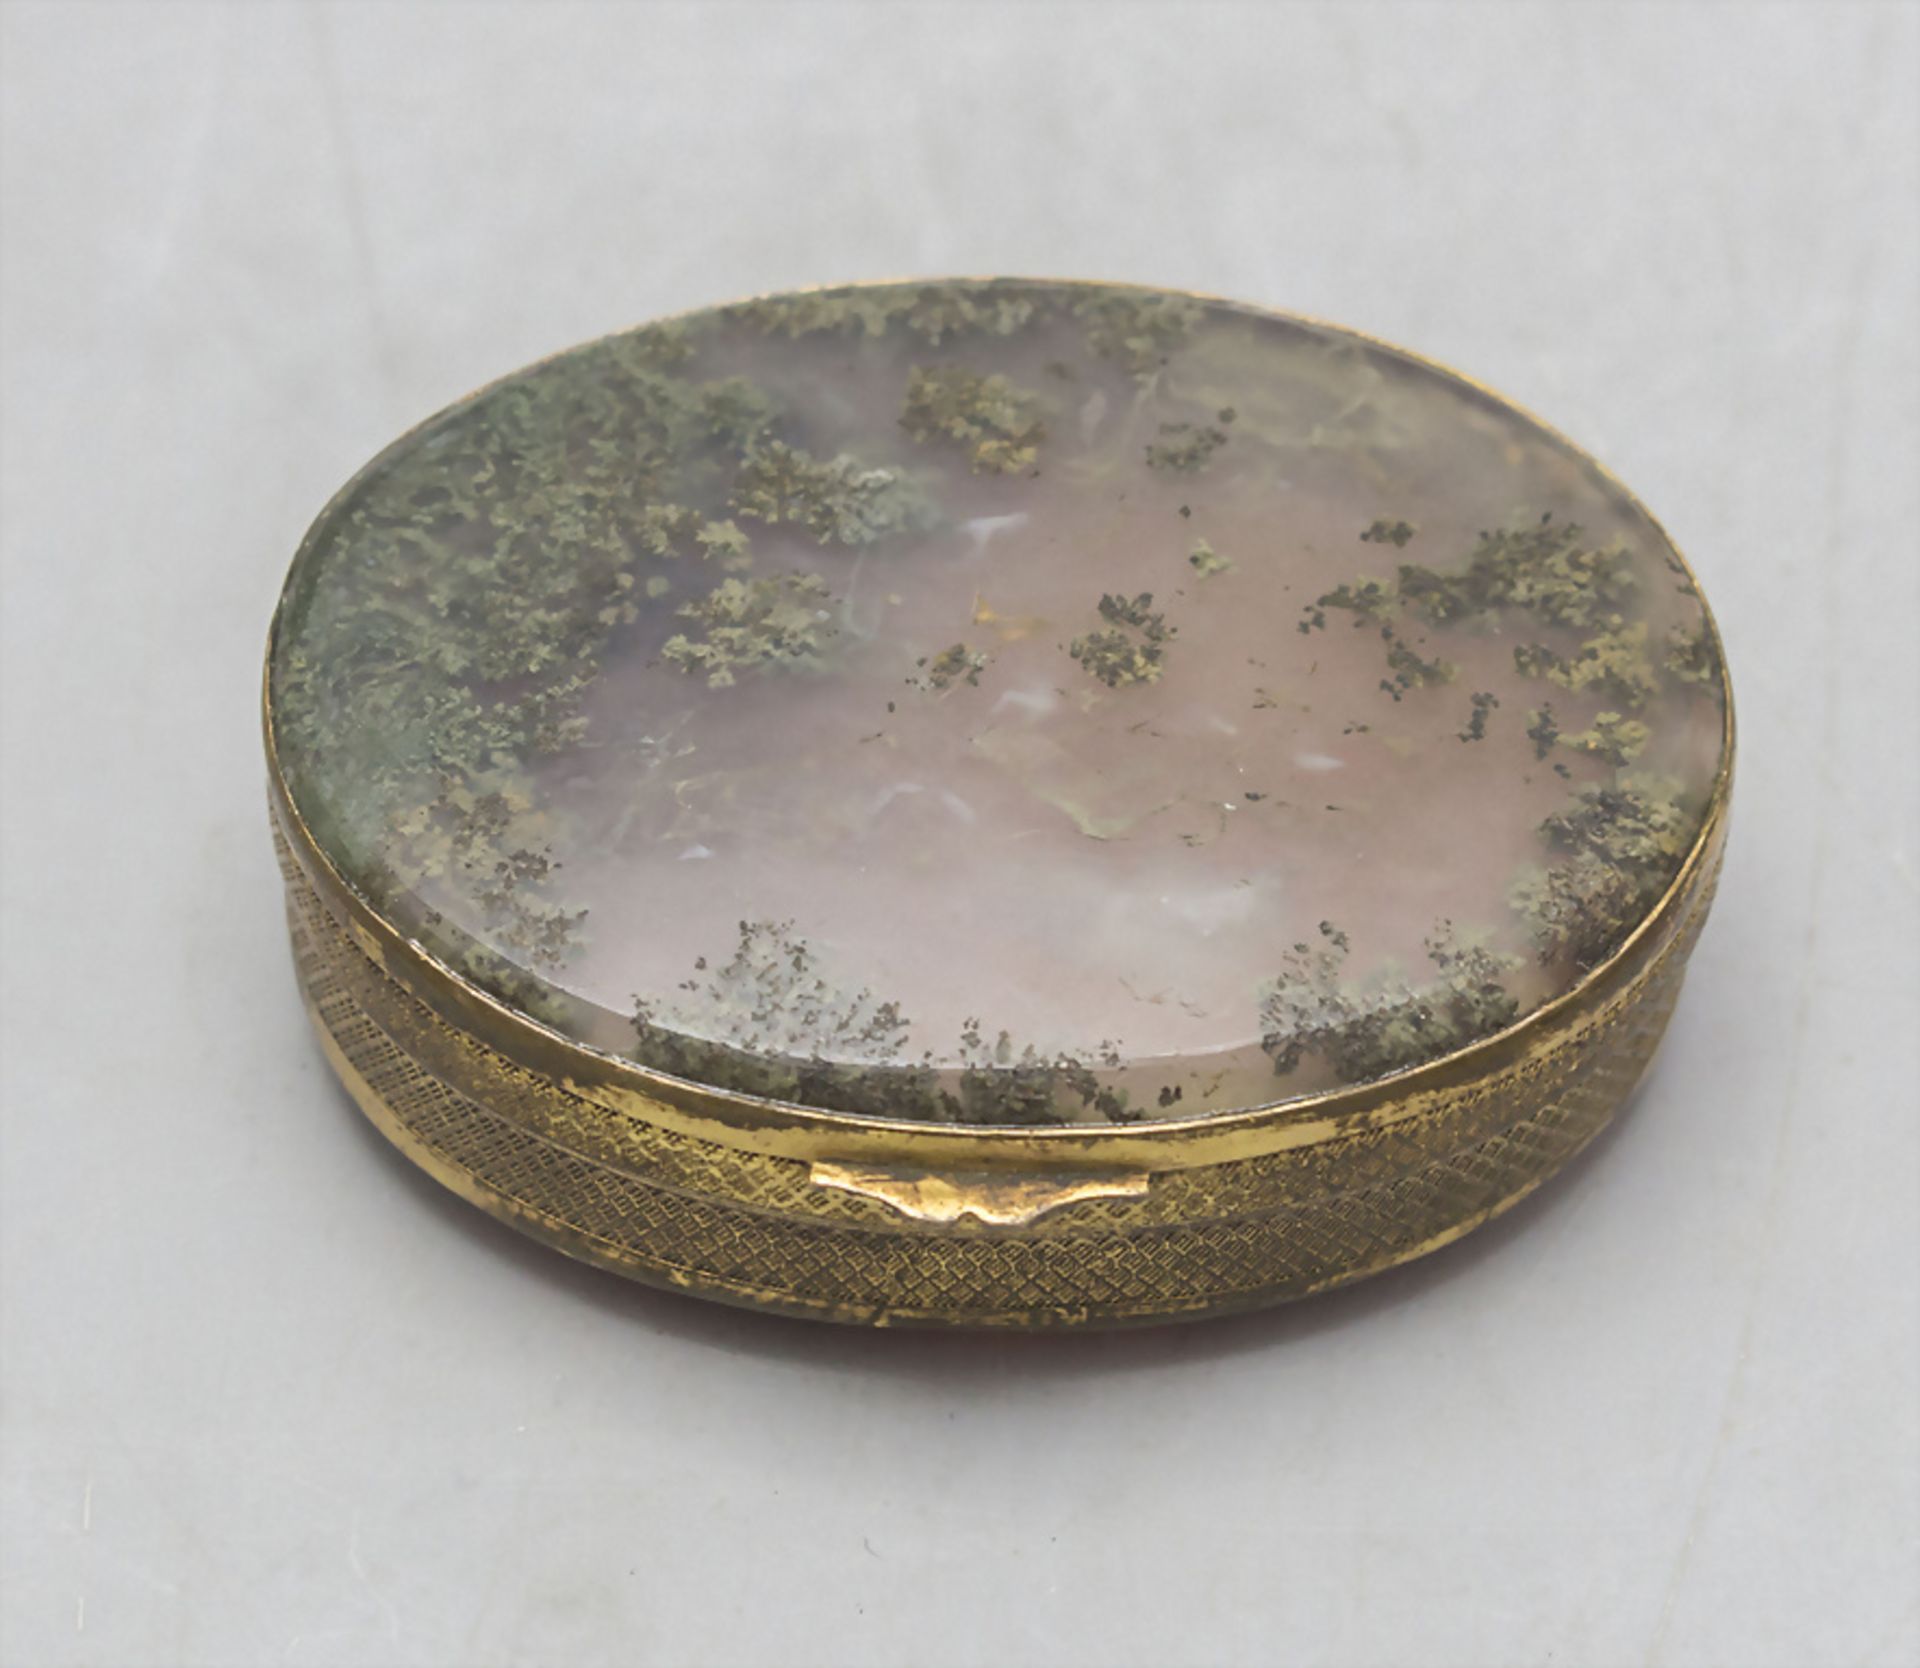 Ovale Achat Deckeldose / Tabatiere / An oval agate snuffbox, Frankreich, Ende 19. Jh.